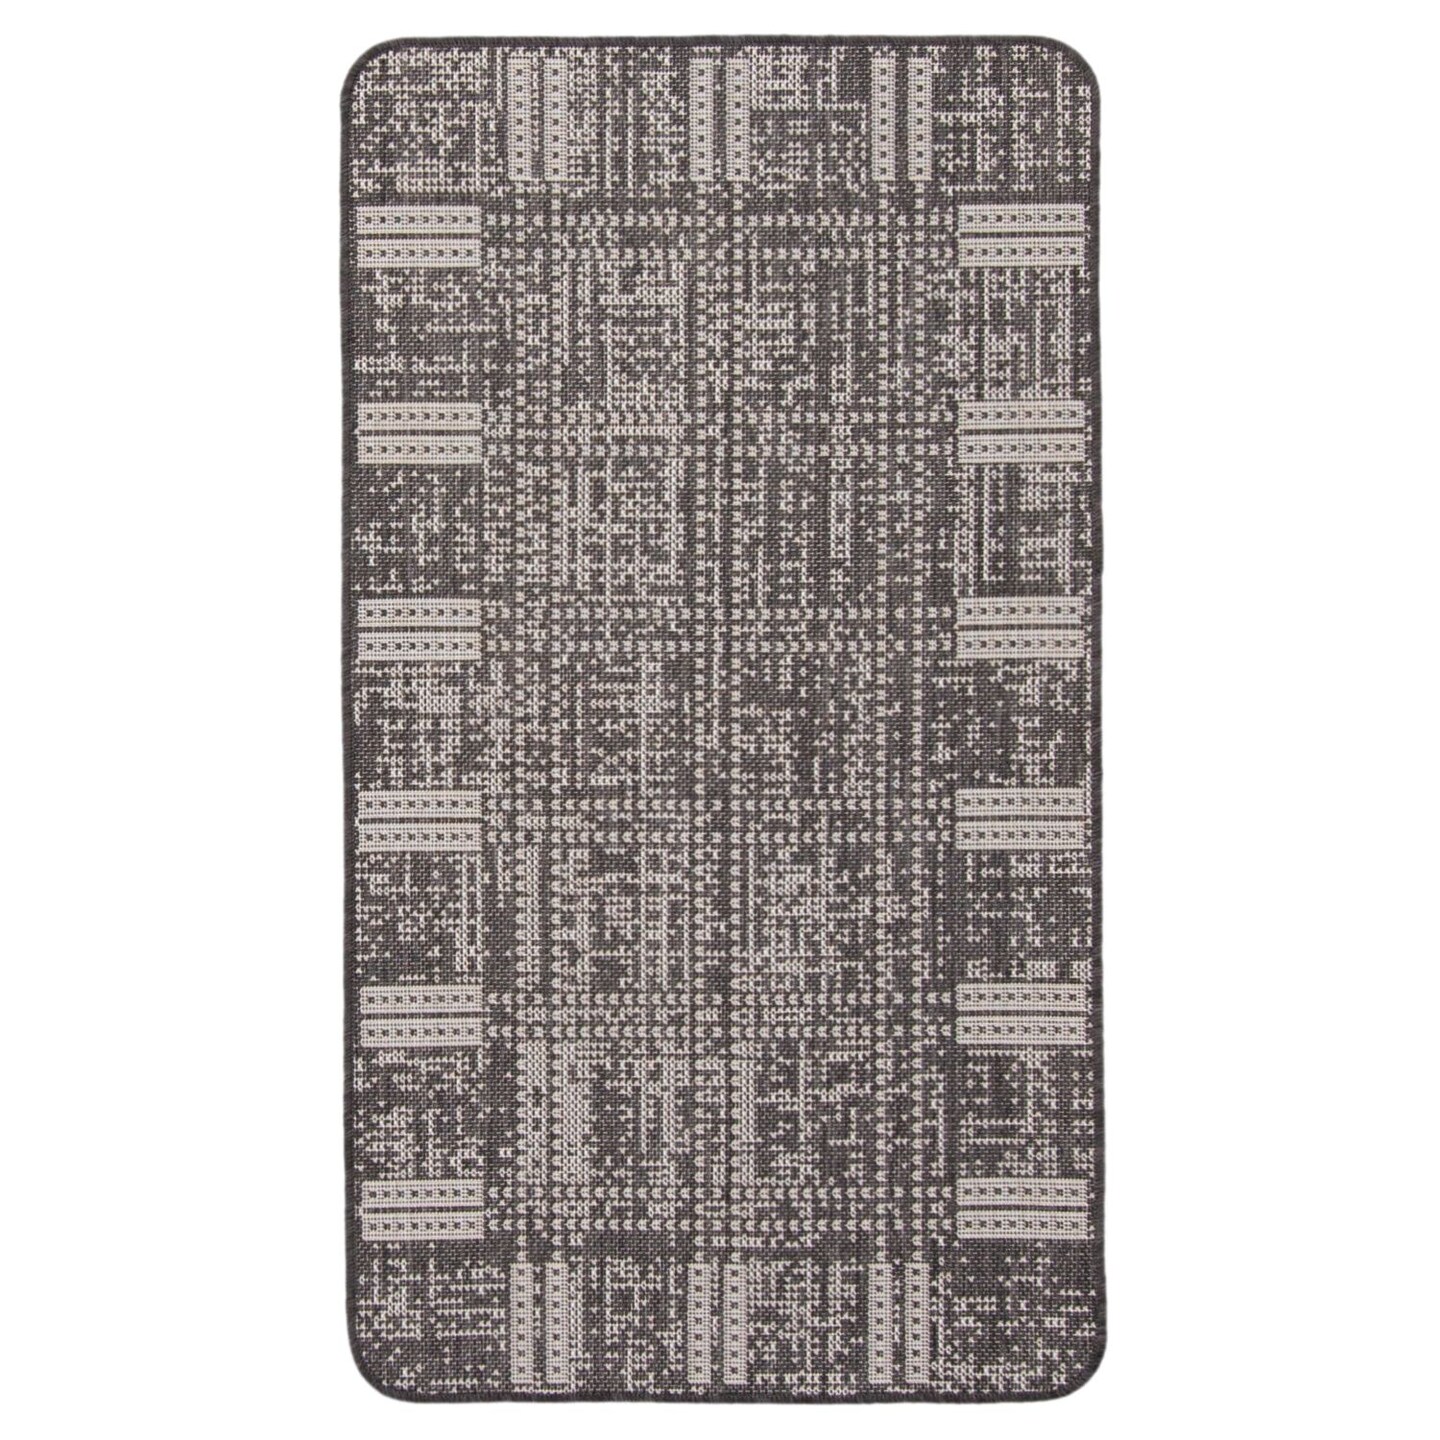 Chaudhary Living 2&#x27; x 4&#x27; Bordered Indoor Outdoor Area Throw Rug - Black and Gray